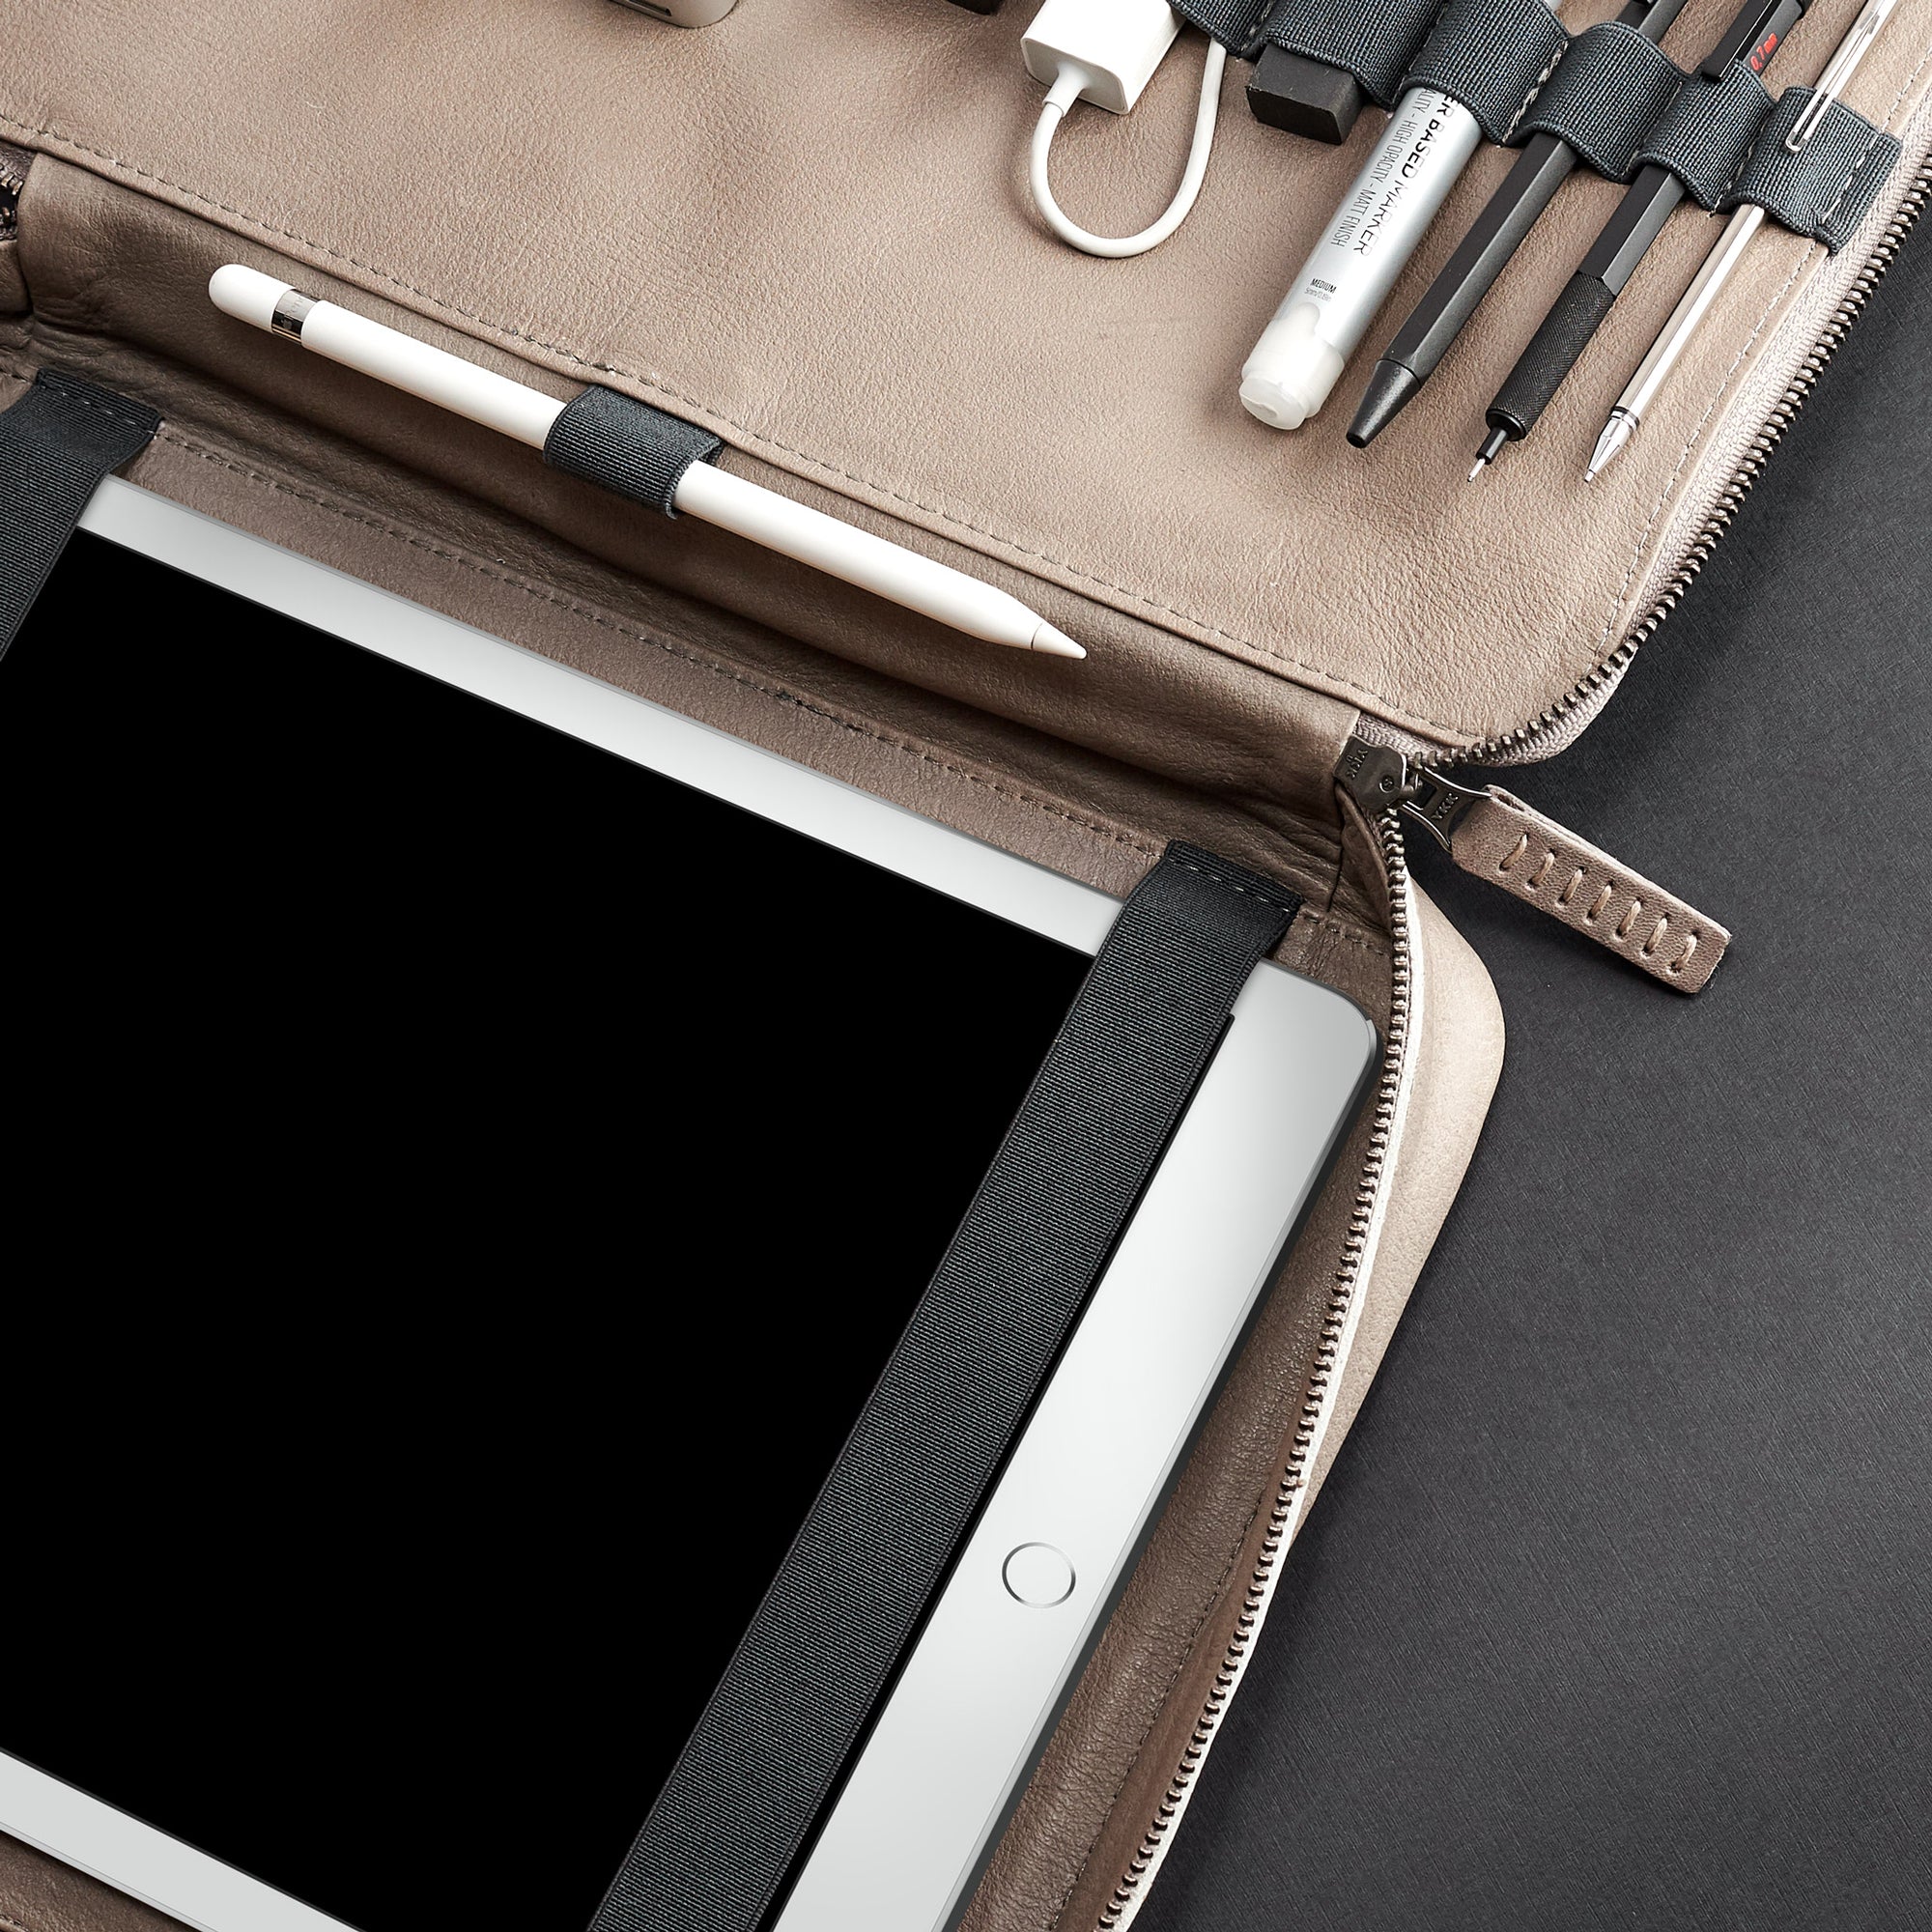 iPad Pro 12.9 bag with dedicated Apple Pencil holder. Grey EDC gear bag by Capra Leather